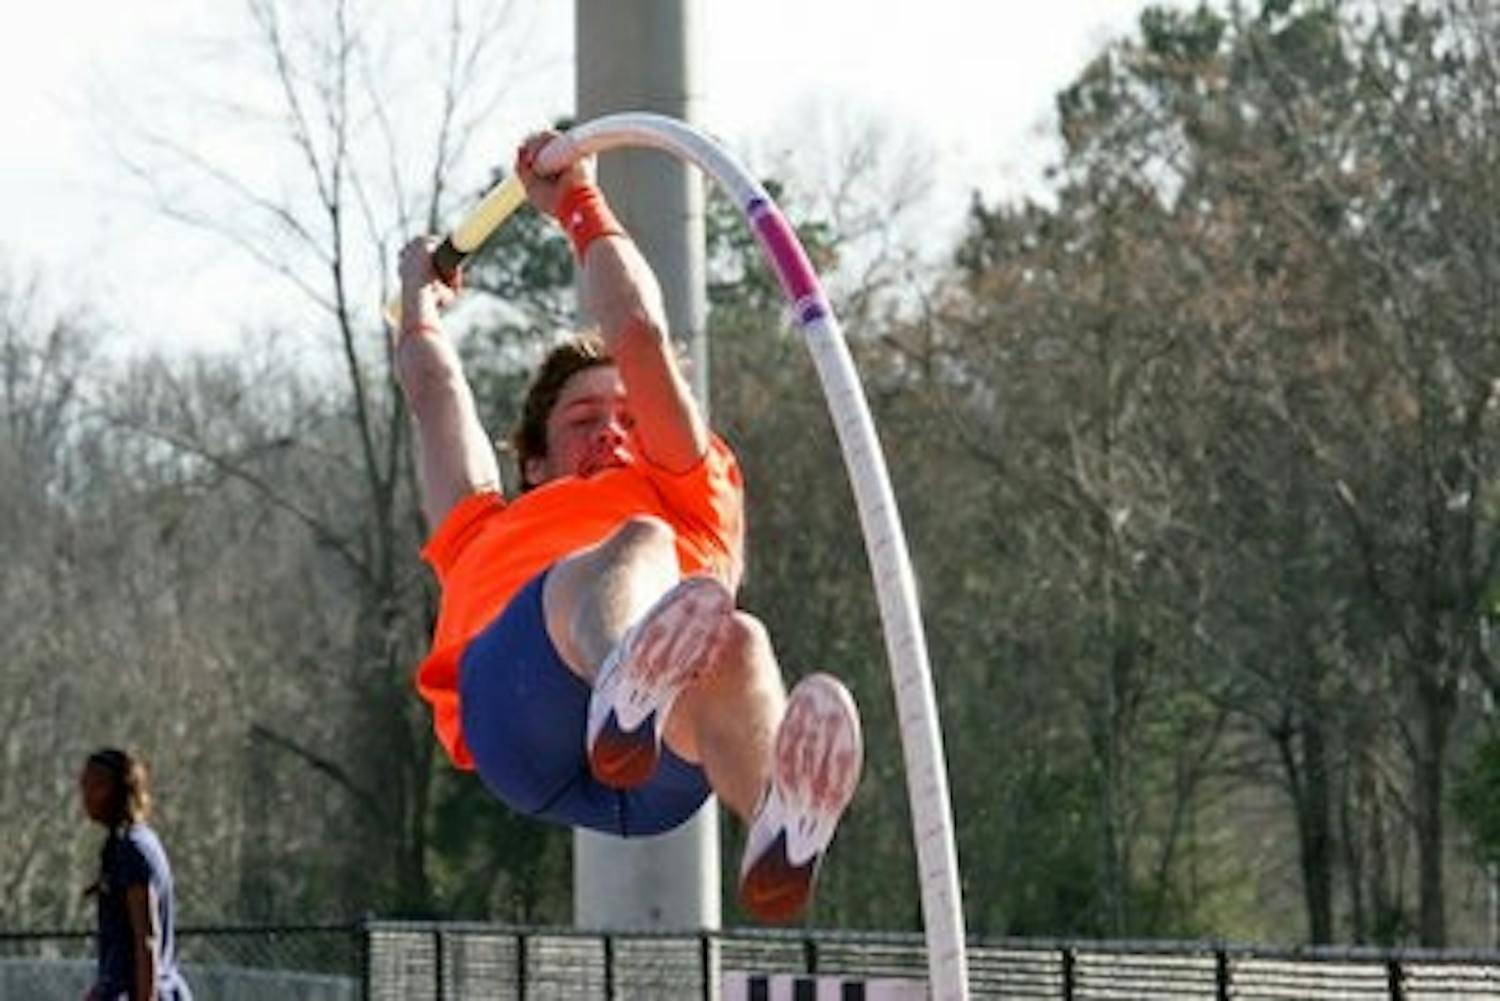 Freshman pole vaulter Chason Farnell practices his technique before the upcoming tournament Friday afternoon. (Rebecca Croomes / PHOTO EDITOR)